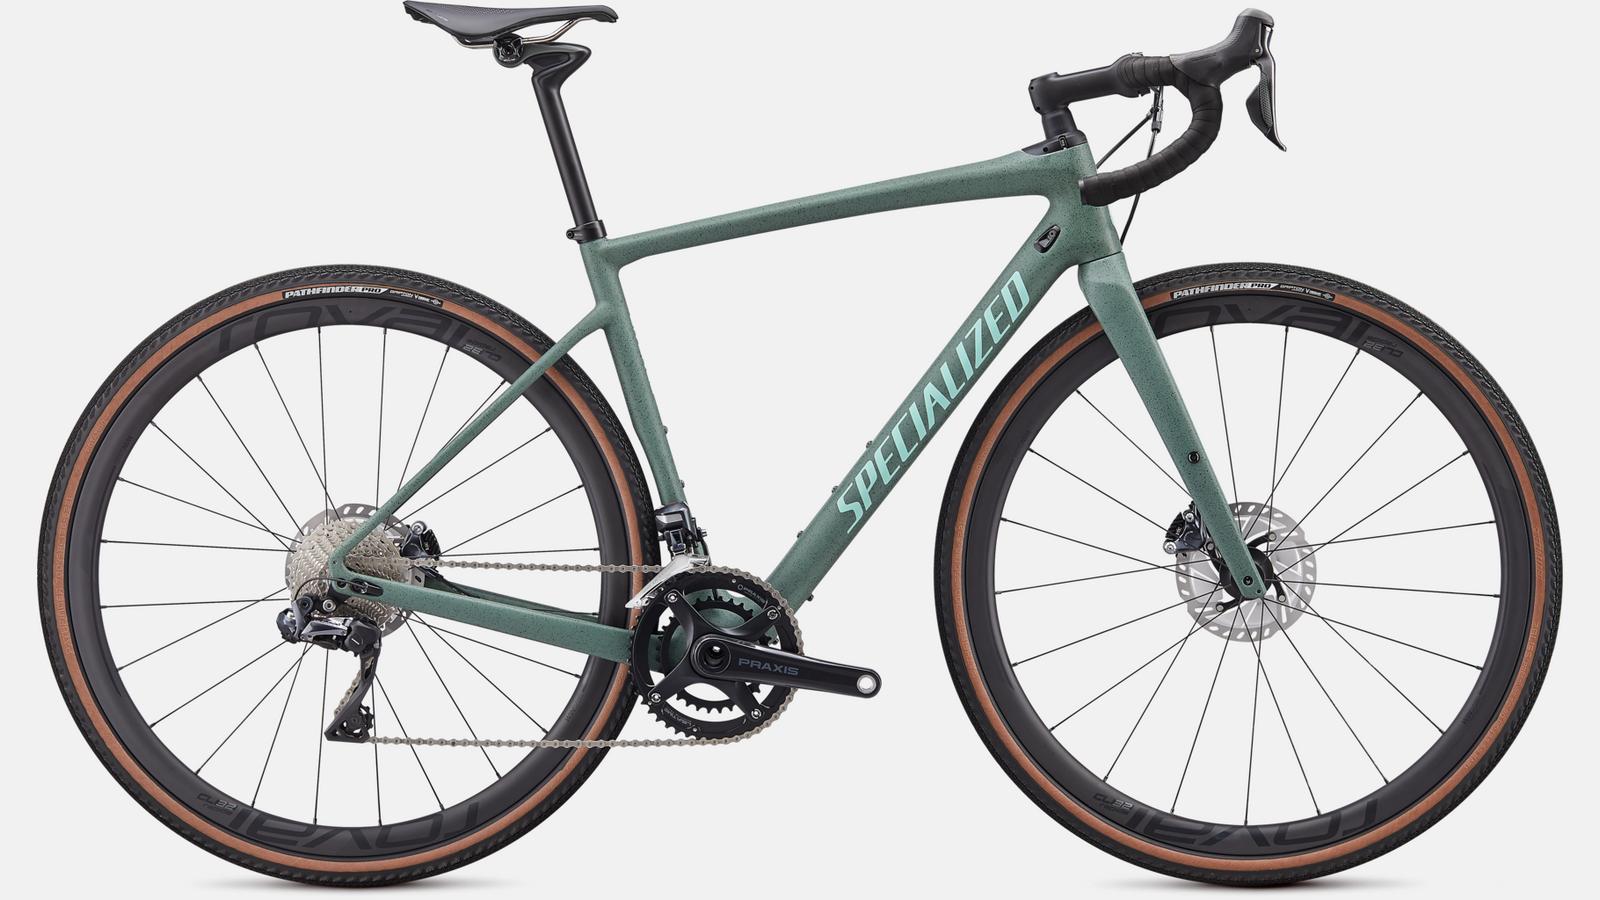 Paint for 2020 Specialized Diverge Pro - Satin Sage Green